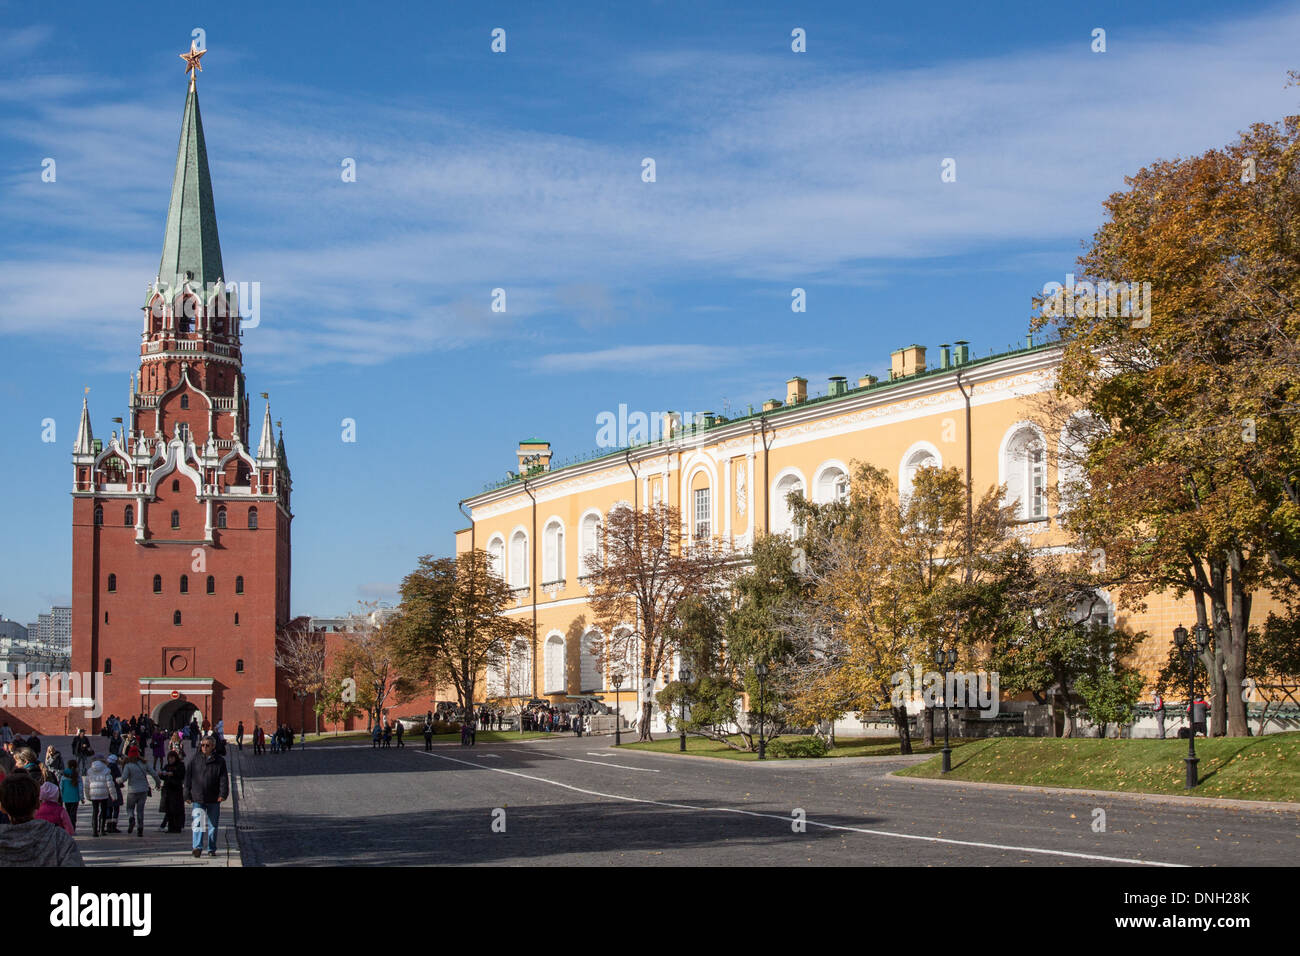 TROITSKAYA TOWER OR TOWER OF THE TRINITY AND THE KREMLIN ARSENAL, WHICH HOUSES THE KREMLIN REGIMENT IN CHARGE OF THE RUSSIAN PRESIDENT'S SECURITY, KREMLIN, MOSCOW, RUSSIA Stock Photo